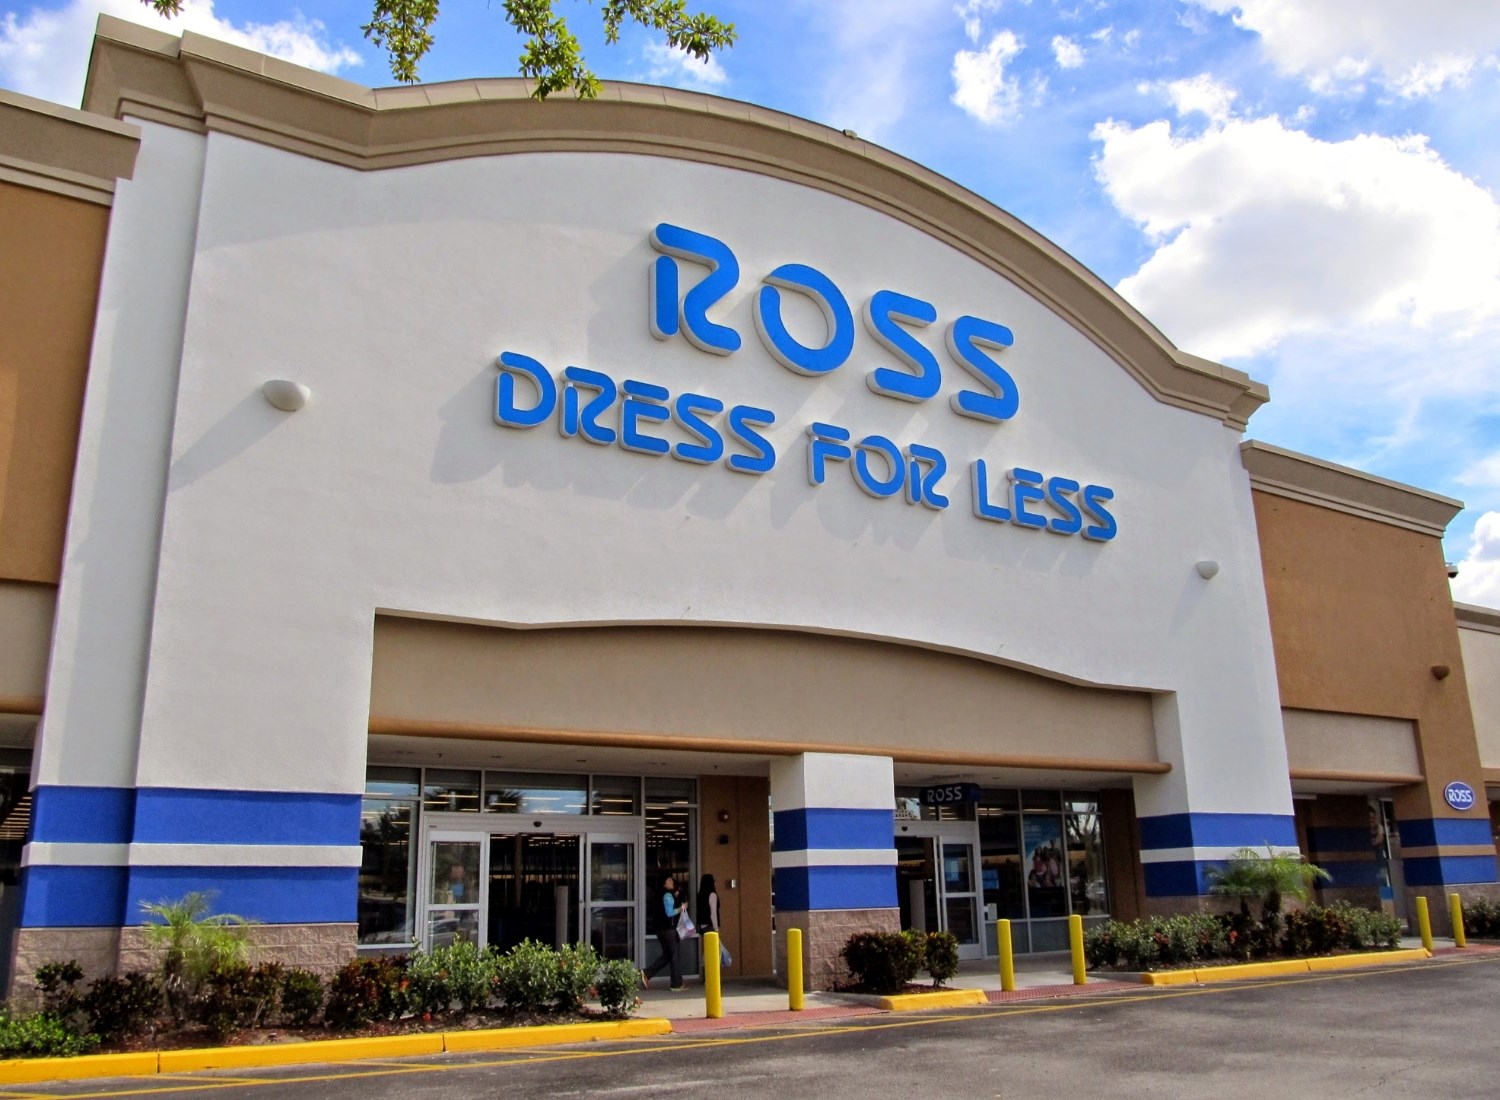 How Ross Stores Is so Successful